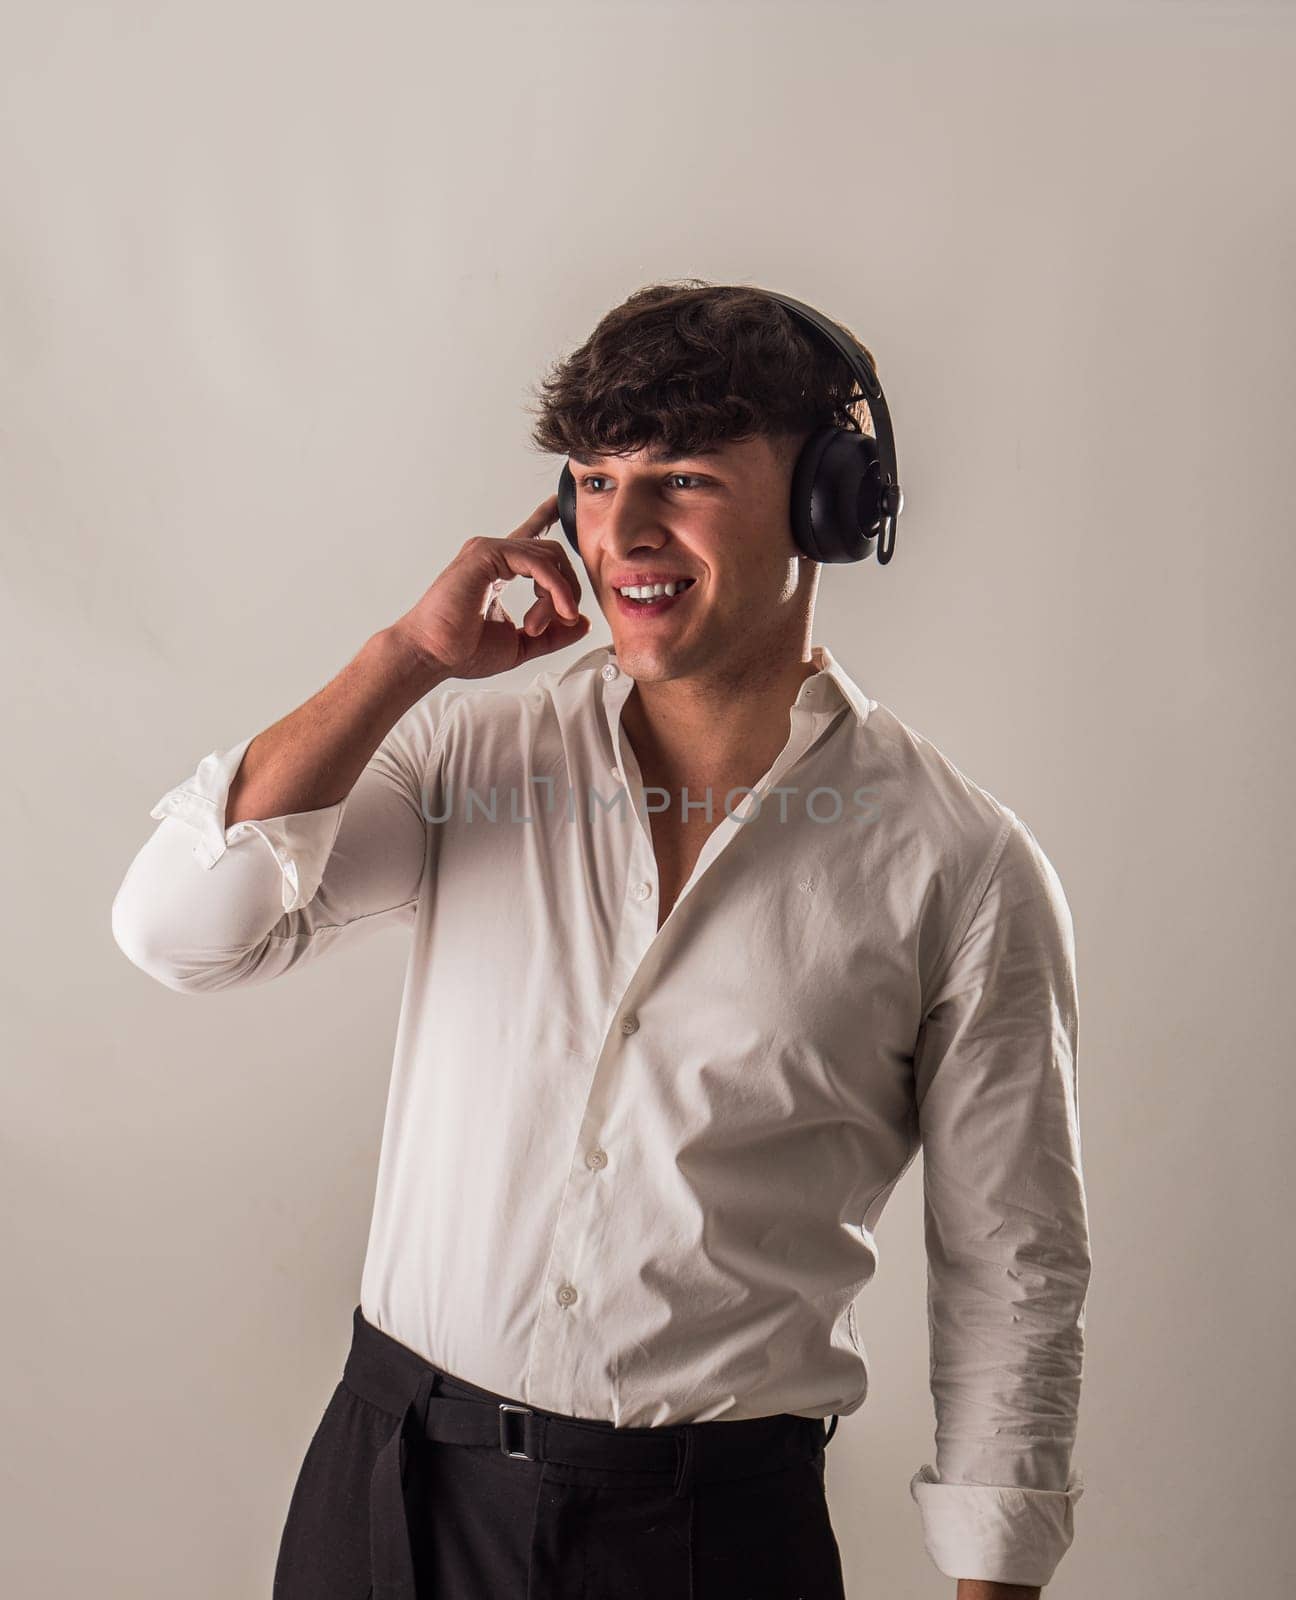 A young handsome man in a white shirt is listening to music on headphones, in studio shot